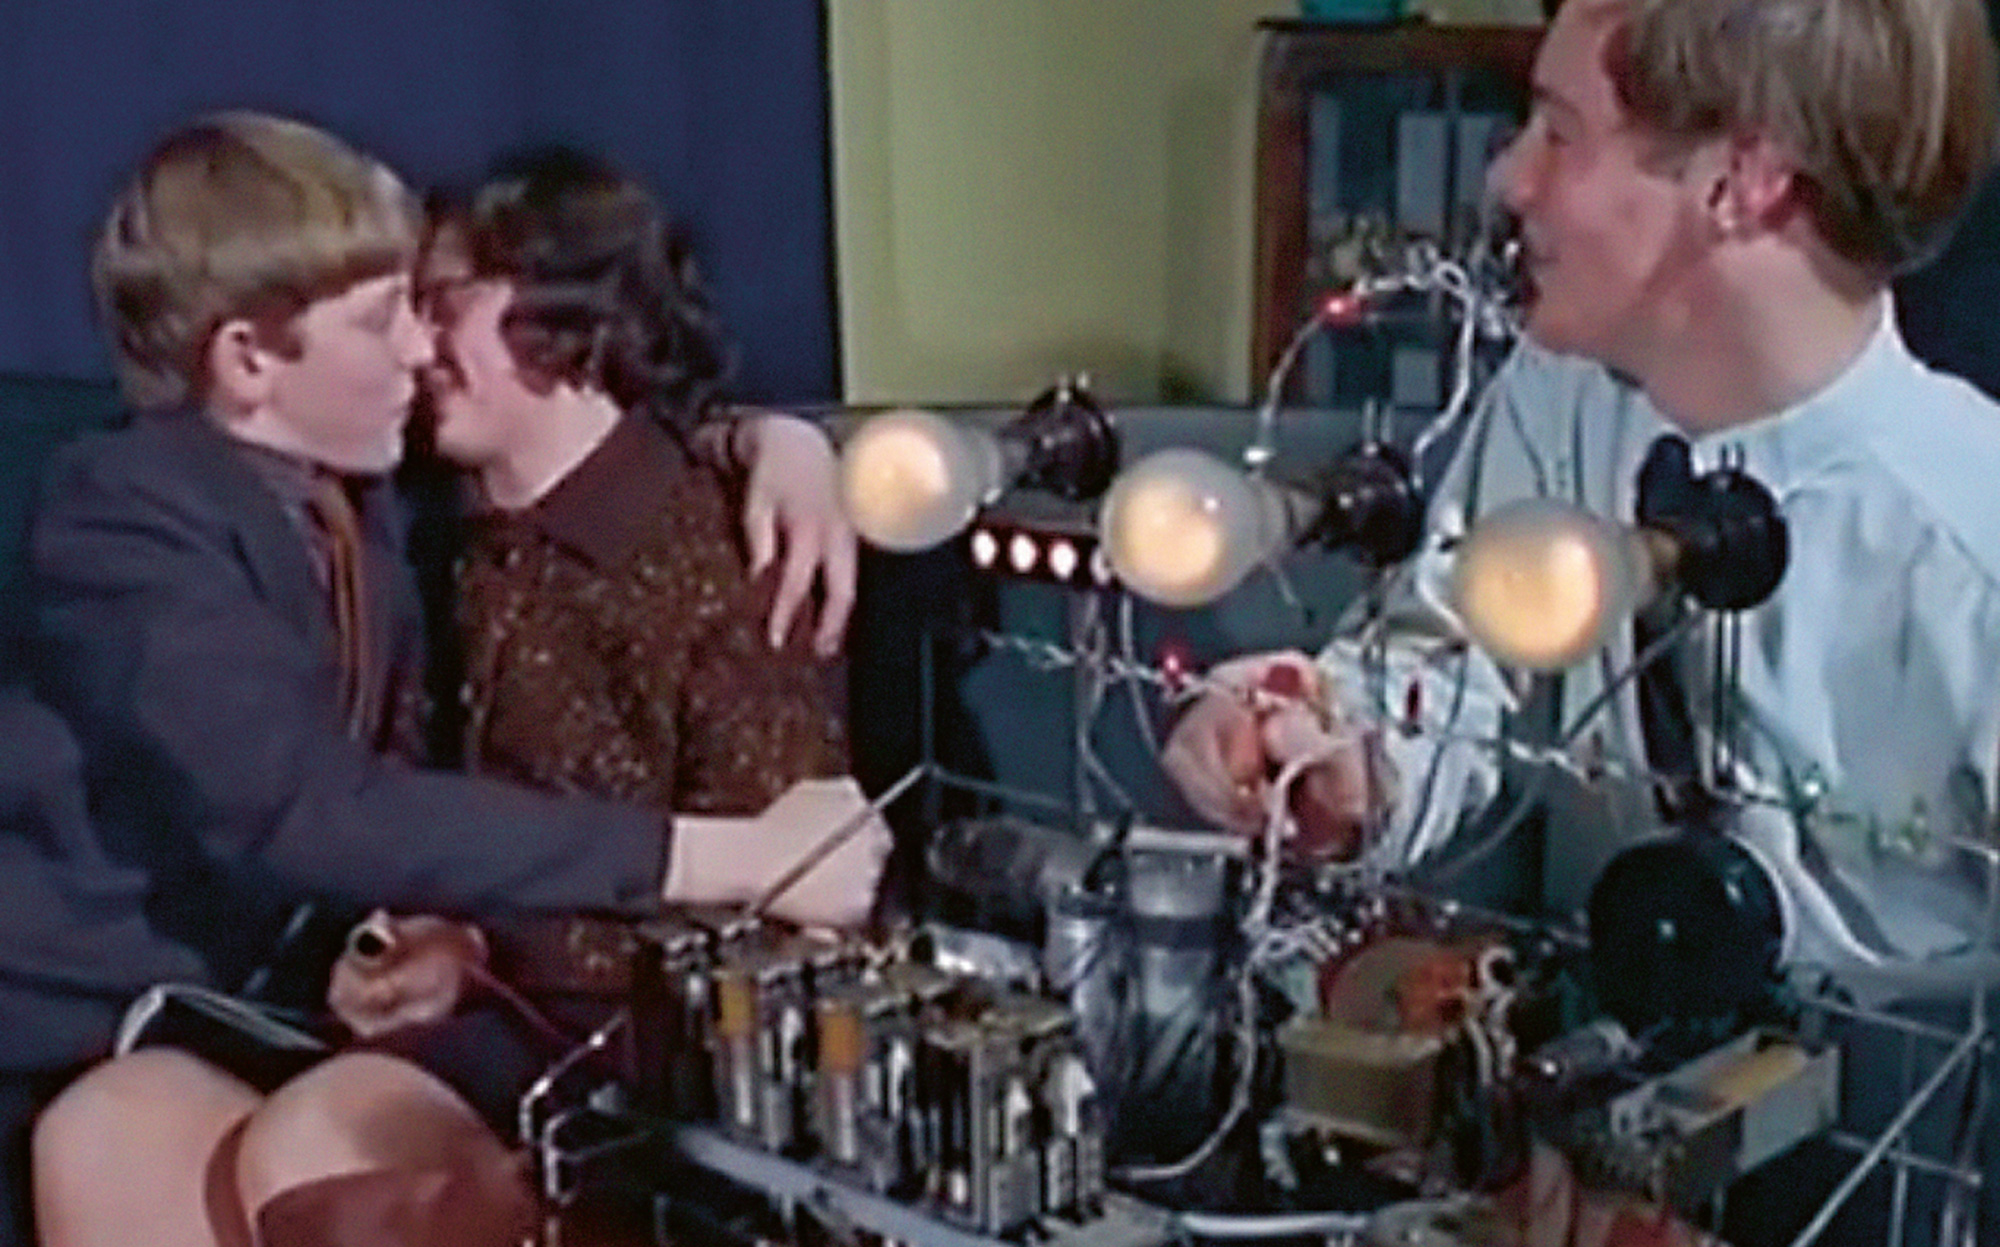 Still from 1965 British Pathé newsreel featuring the Snogometer, an invention of sixteen-year-old Malcolm Pickard (at right, manning the apparatus) designed to measure the electrical resistance between a couple engaged in “passionate mashing.”